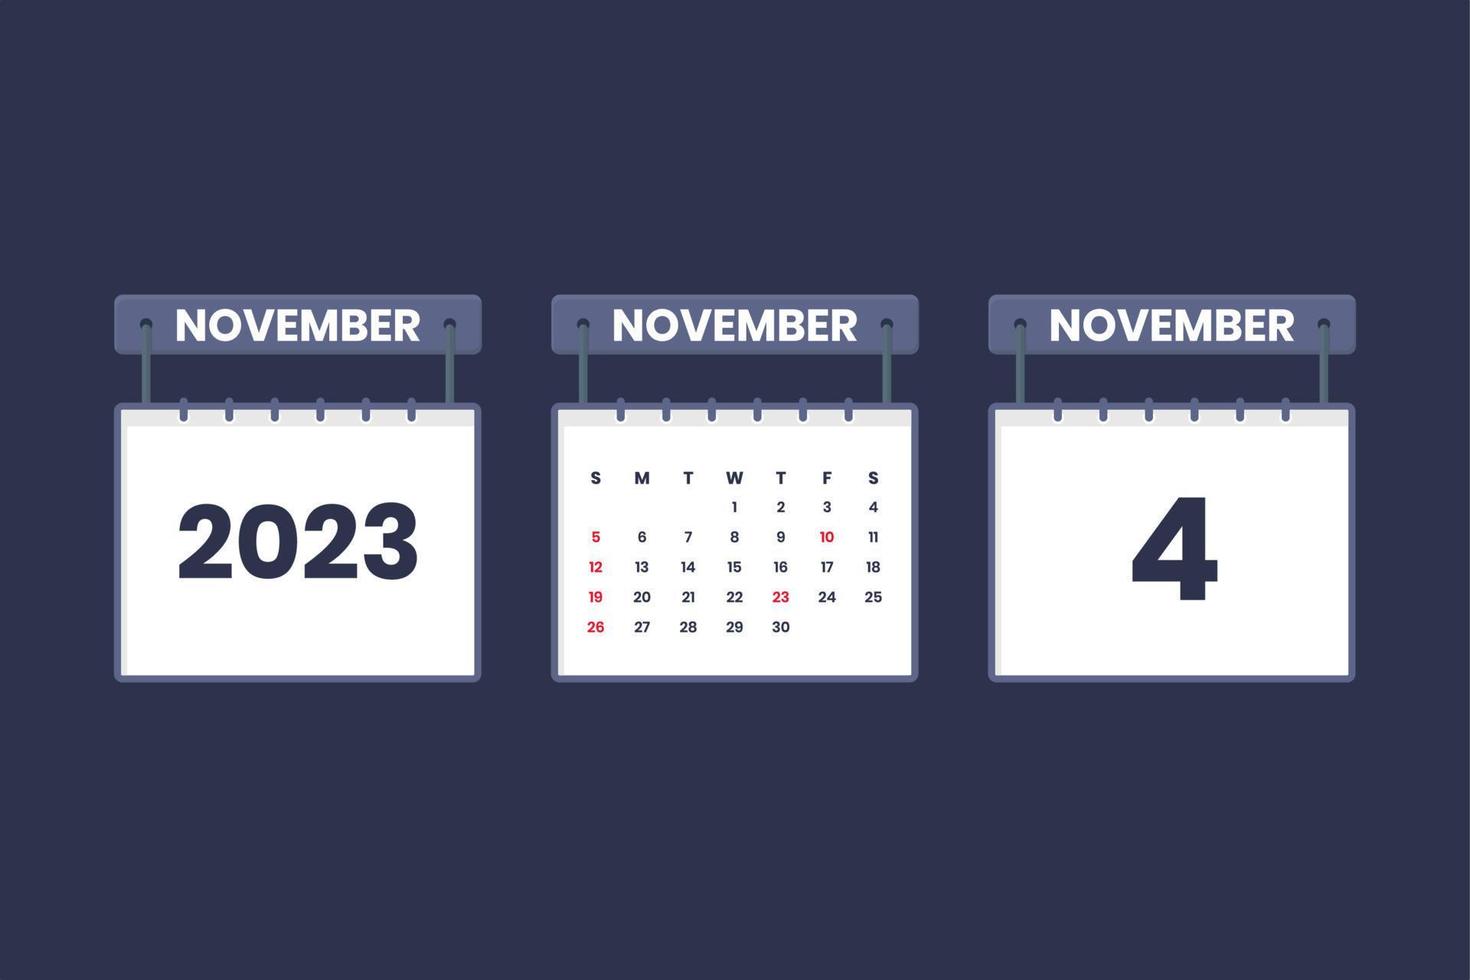 4 November 2023 calendar icon for schedule, appointment, important date concept vector